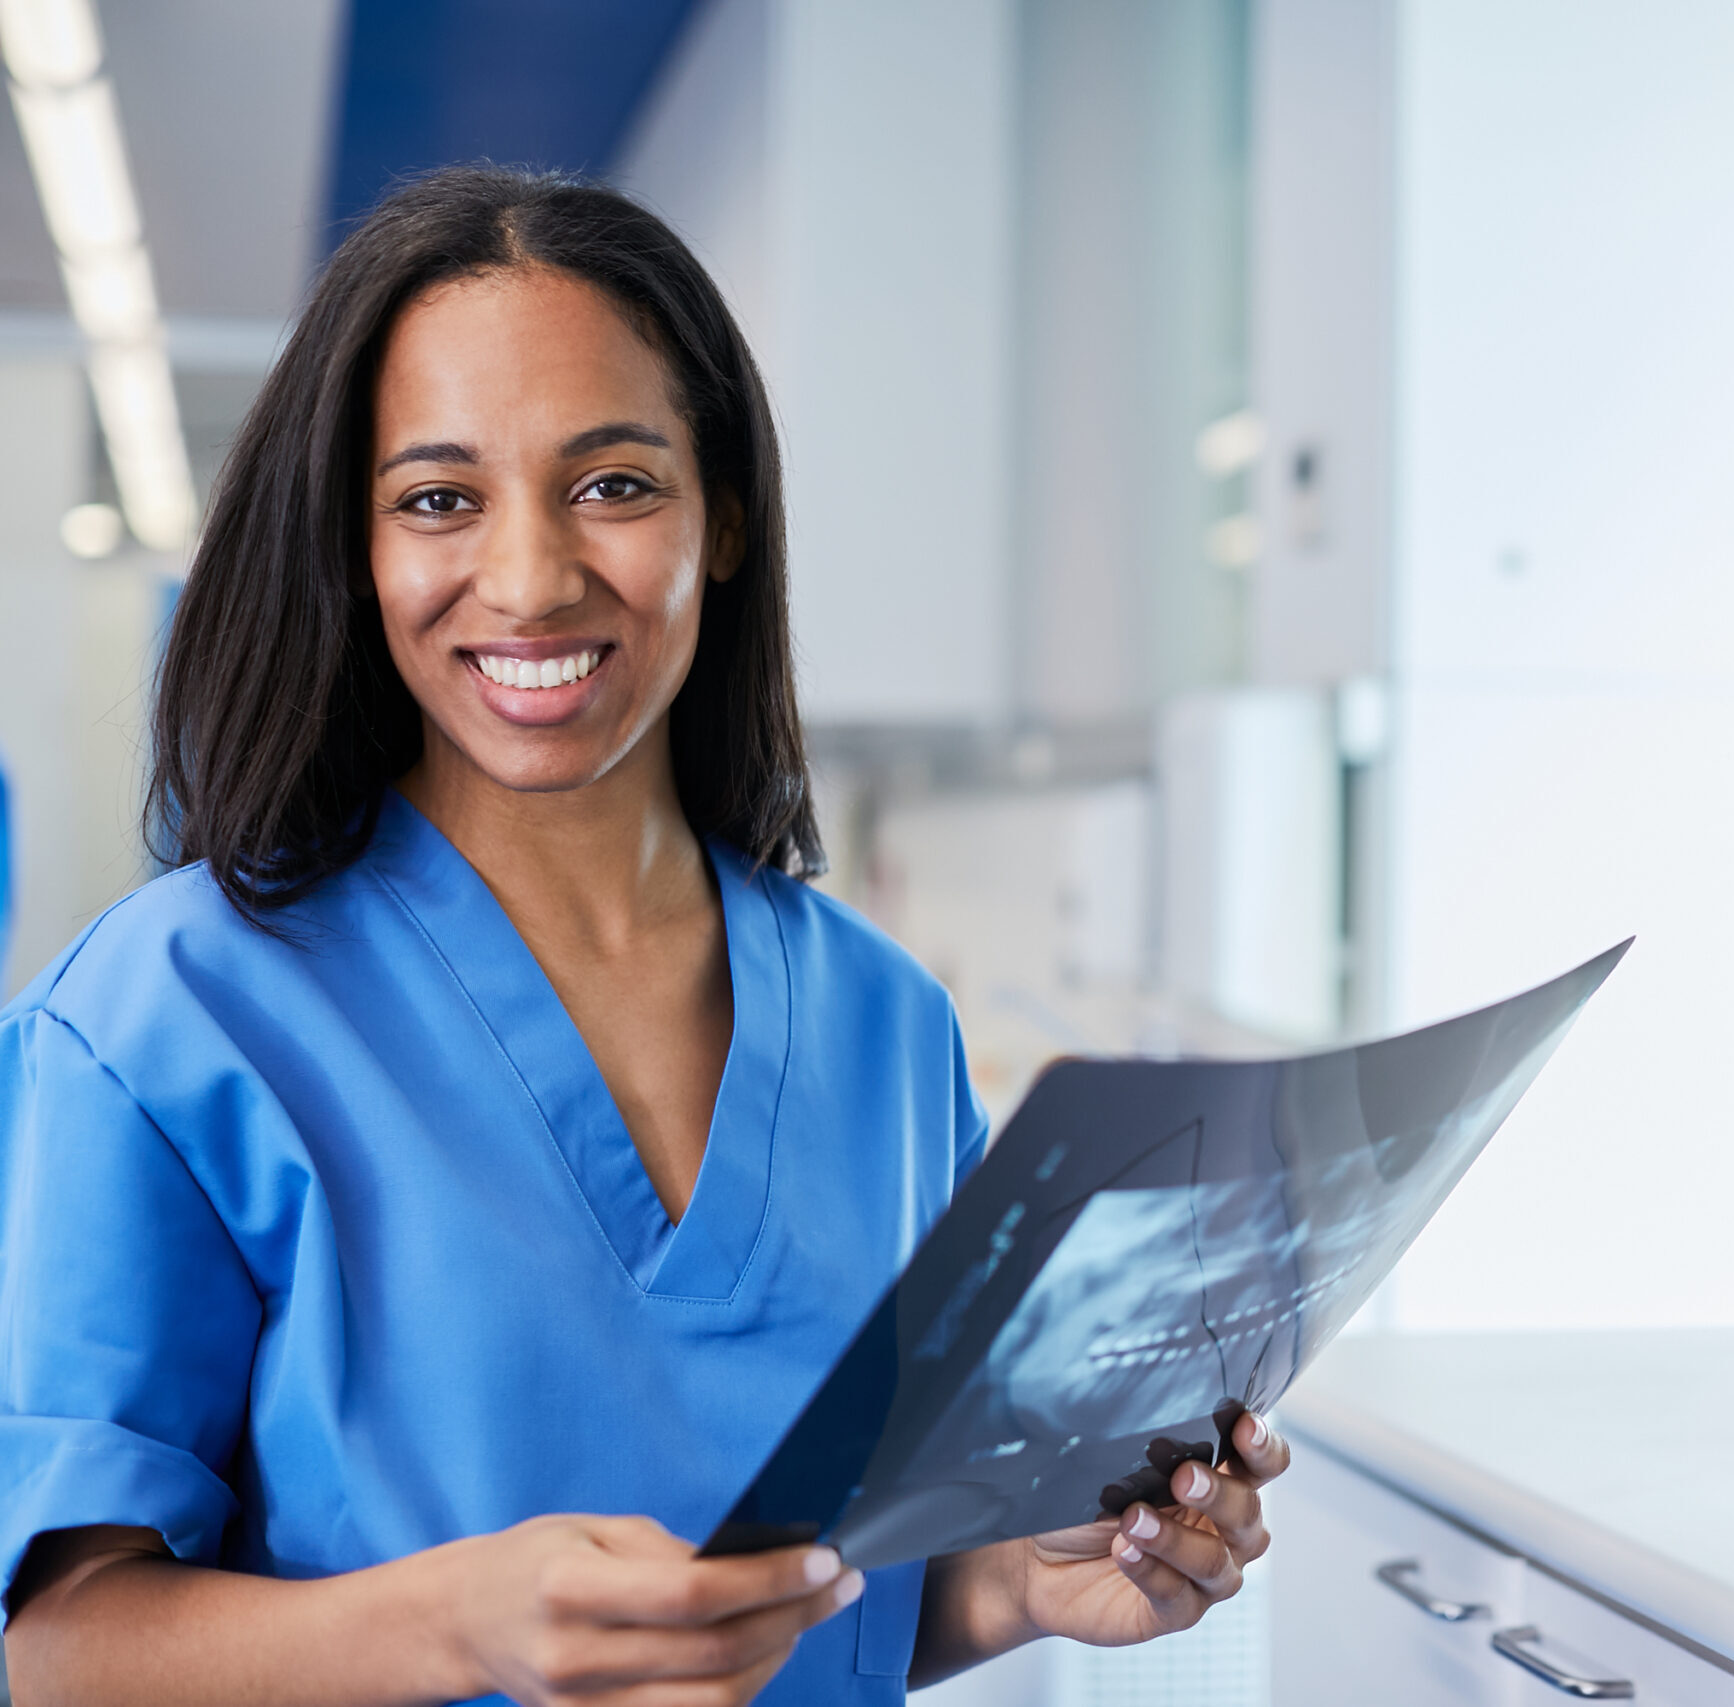 Dental assistant in blue scrubs smiling and holding dental x-ray